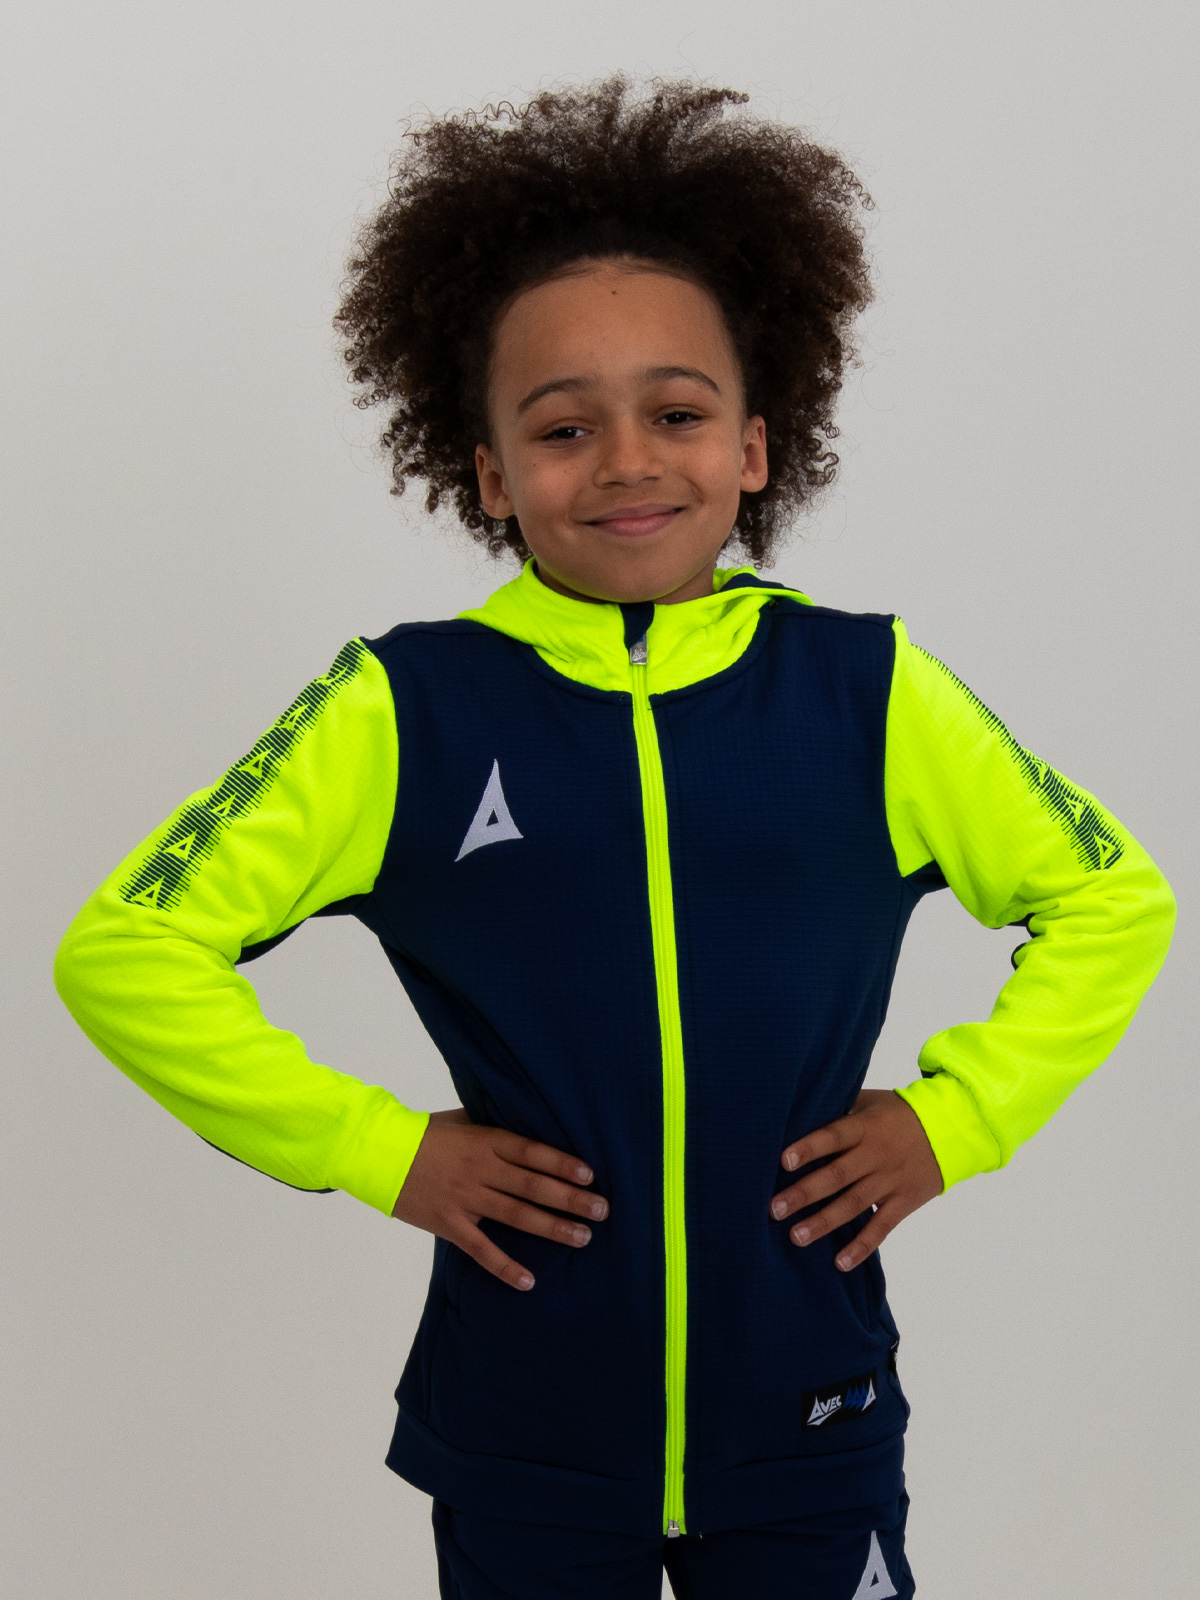 a young boy in a vibrant neon yellow and blue hoody, radiating energy and style.